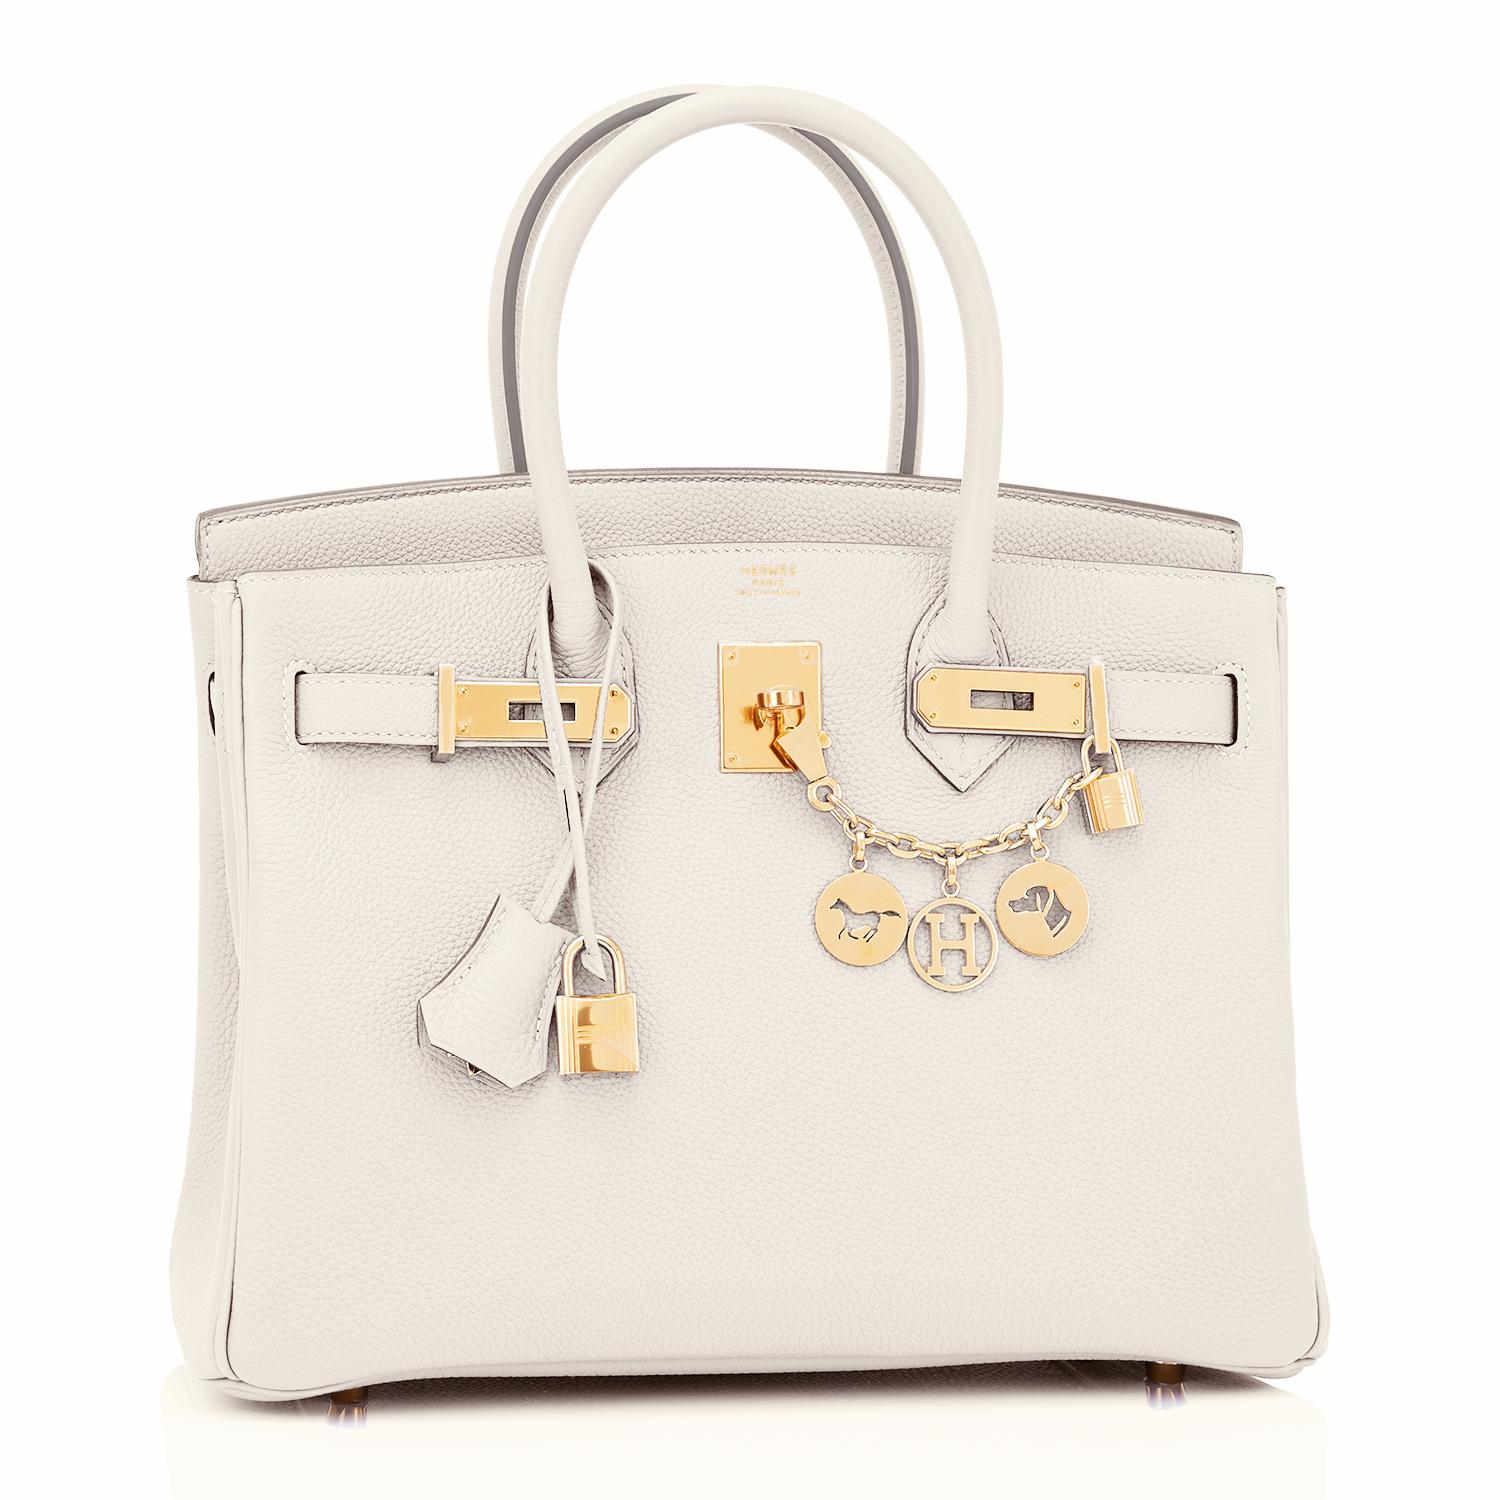 Hermes Birkin 30 Craie Togo Chalk Off White Gold Hardware Bag Z Stamp, 2021
Just purchased from Hermes store; bag bears new interior 2021 Z Stamp.
Brand New in Box. Store fresh. Pristine Condition (plastic on hardware.)
Perfect gift! Comes in full